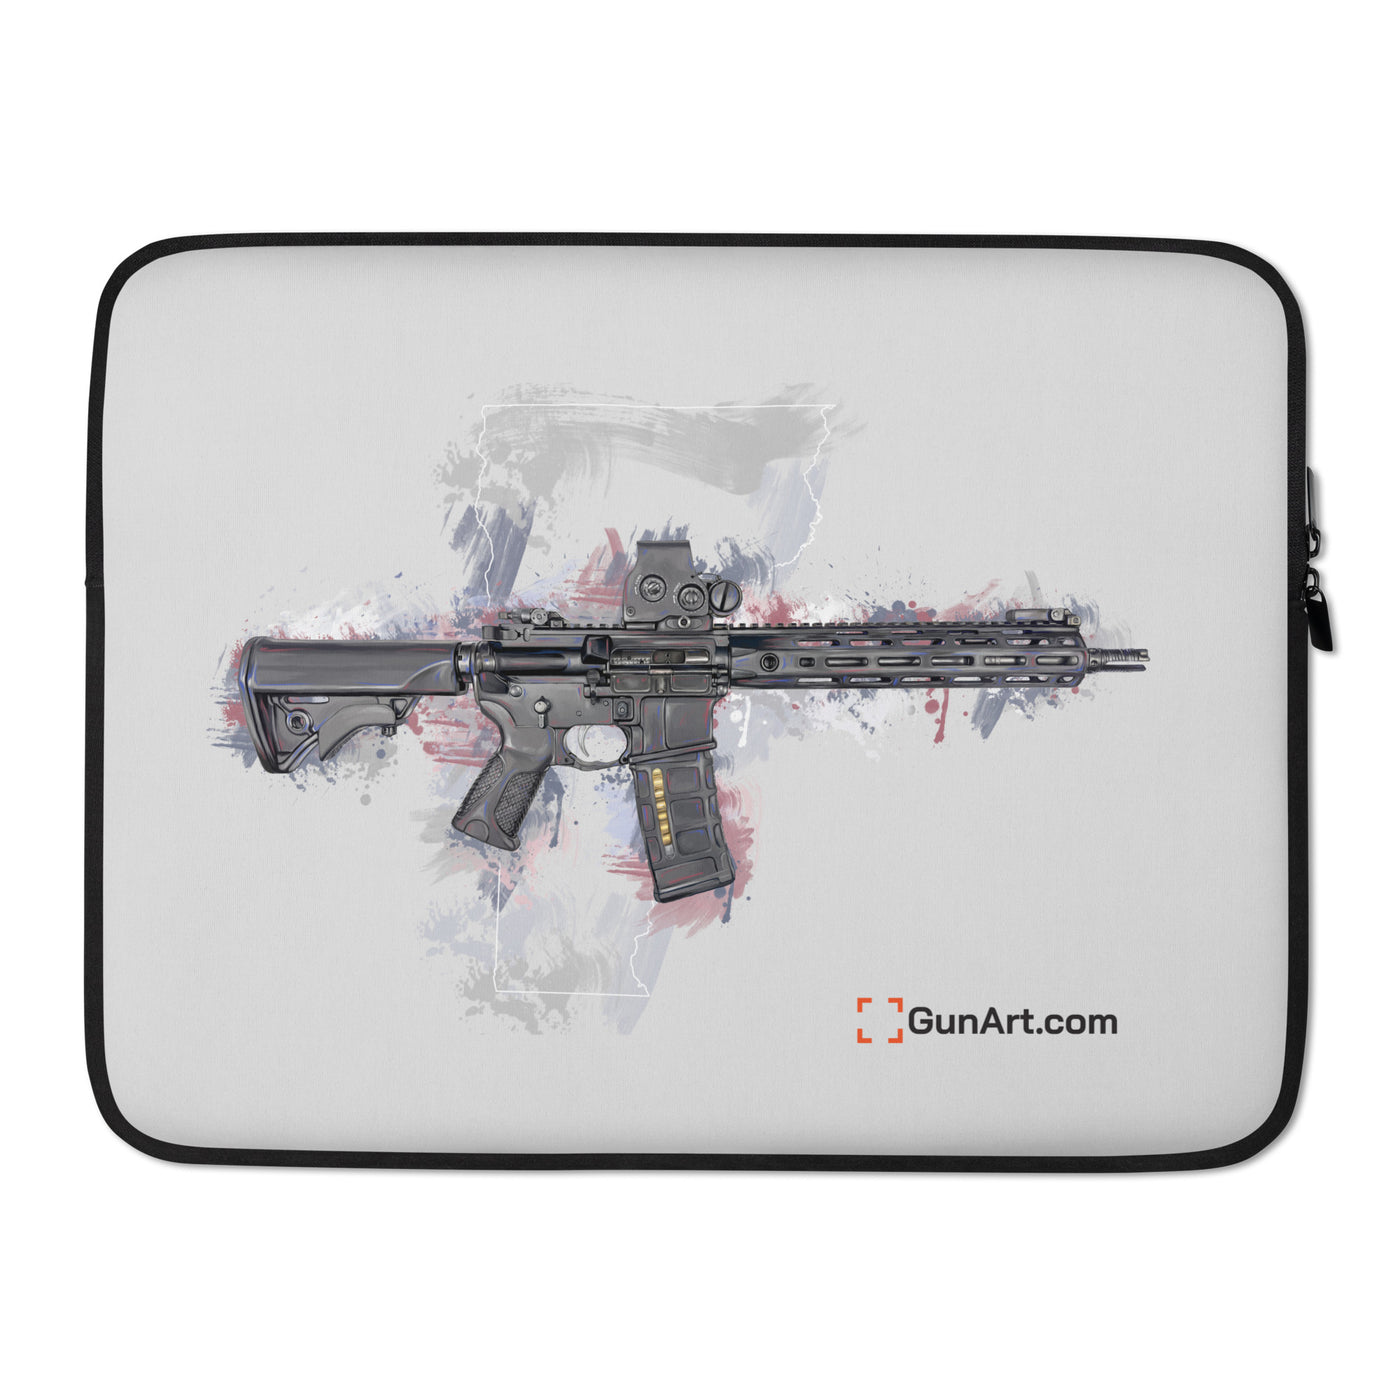 Defending Freedom - Vermont - AR-15 State Laptop Sleeve - White State